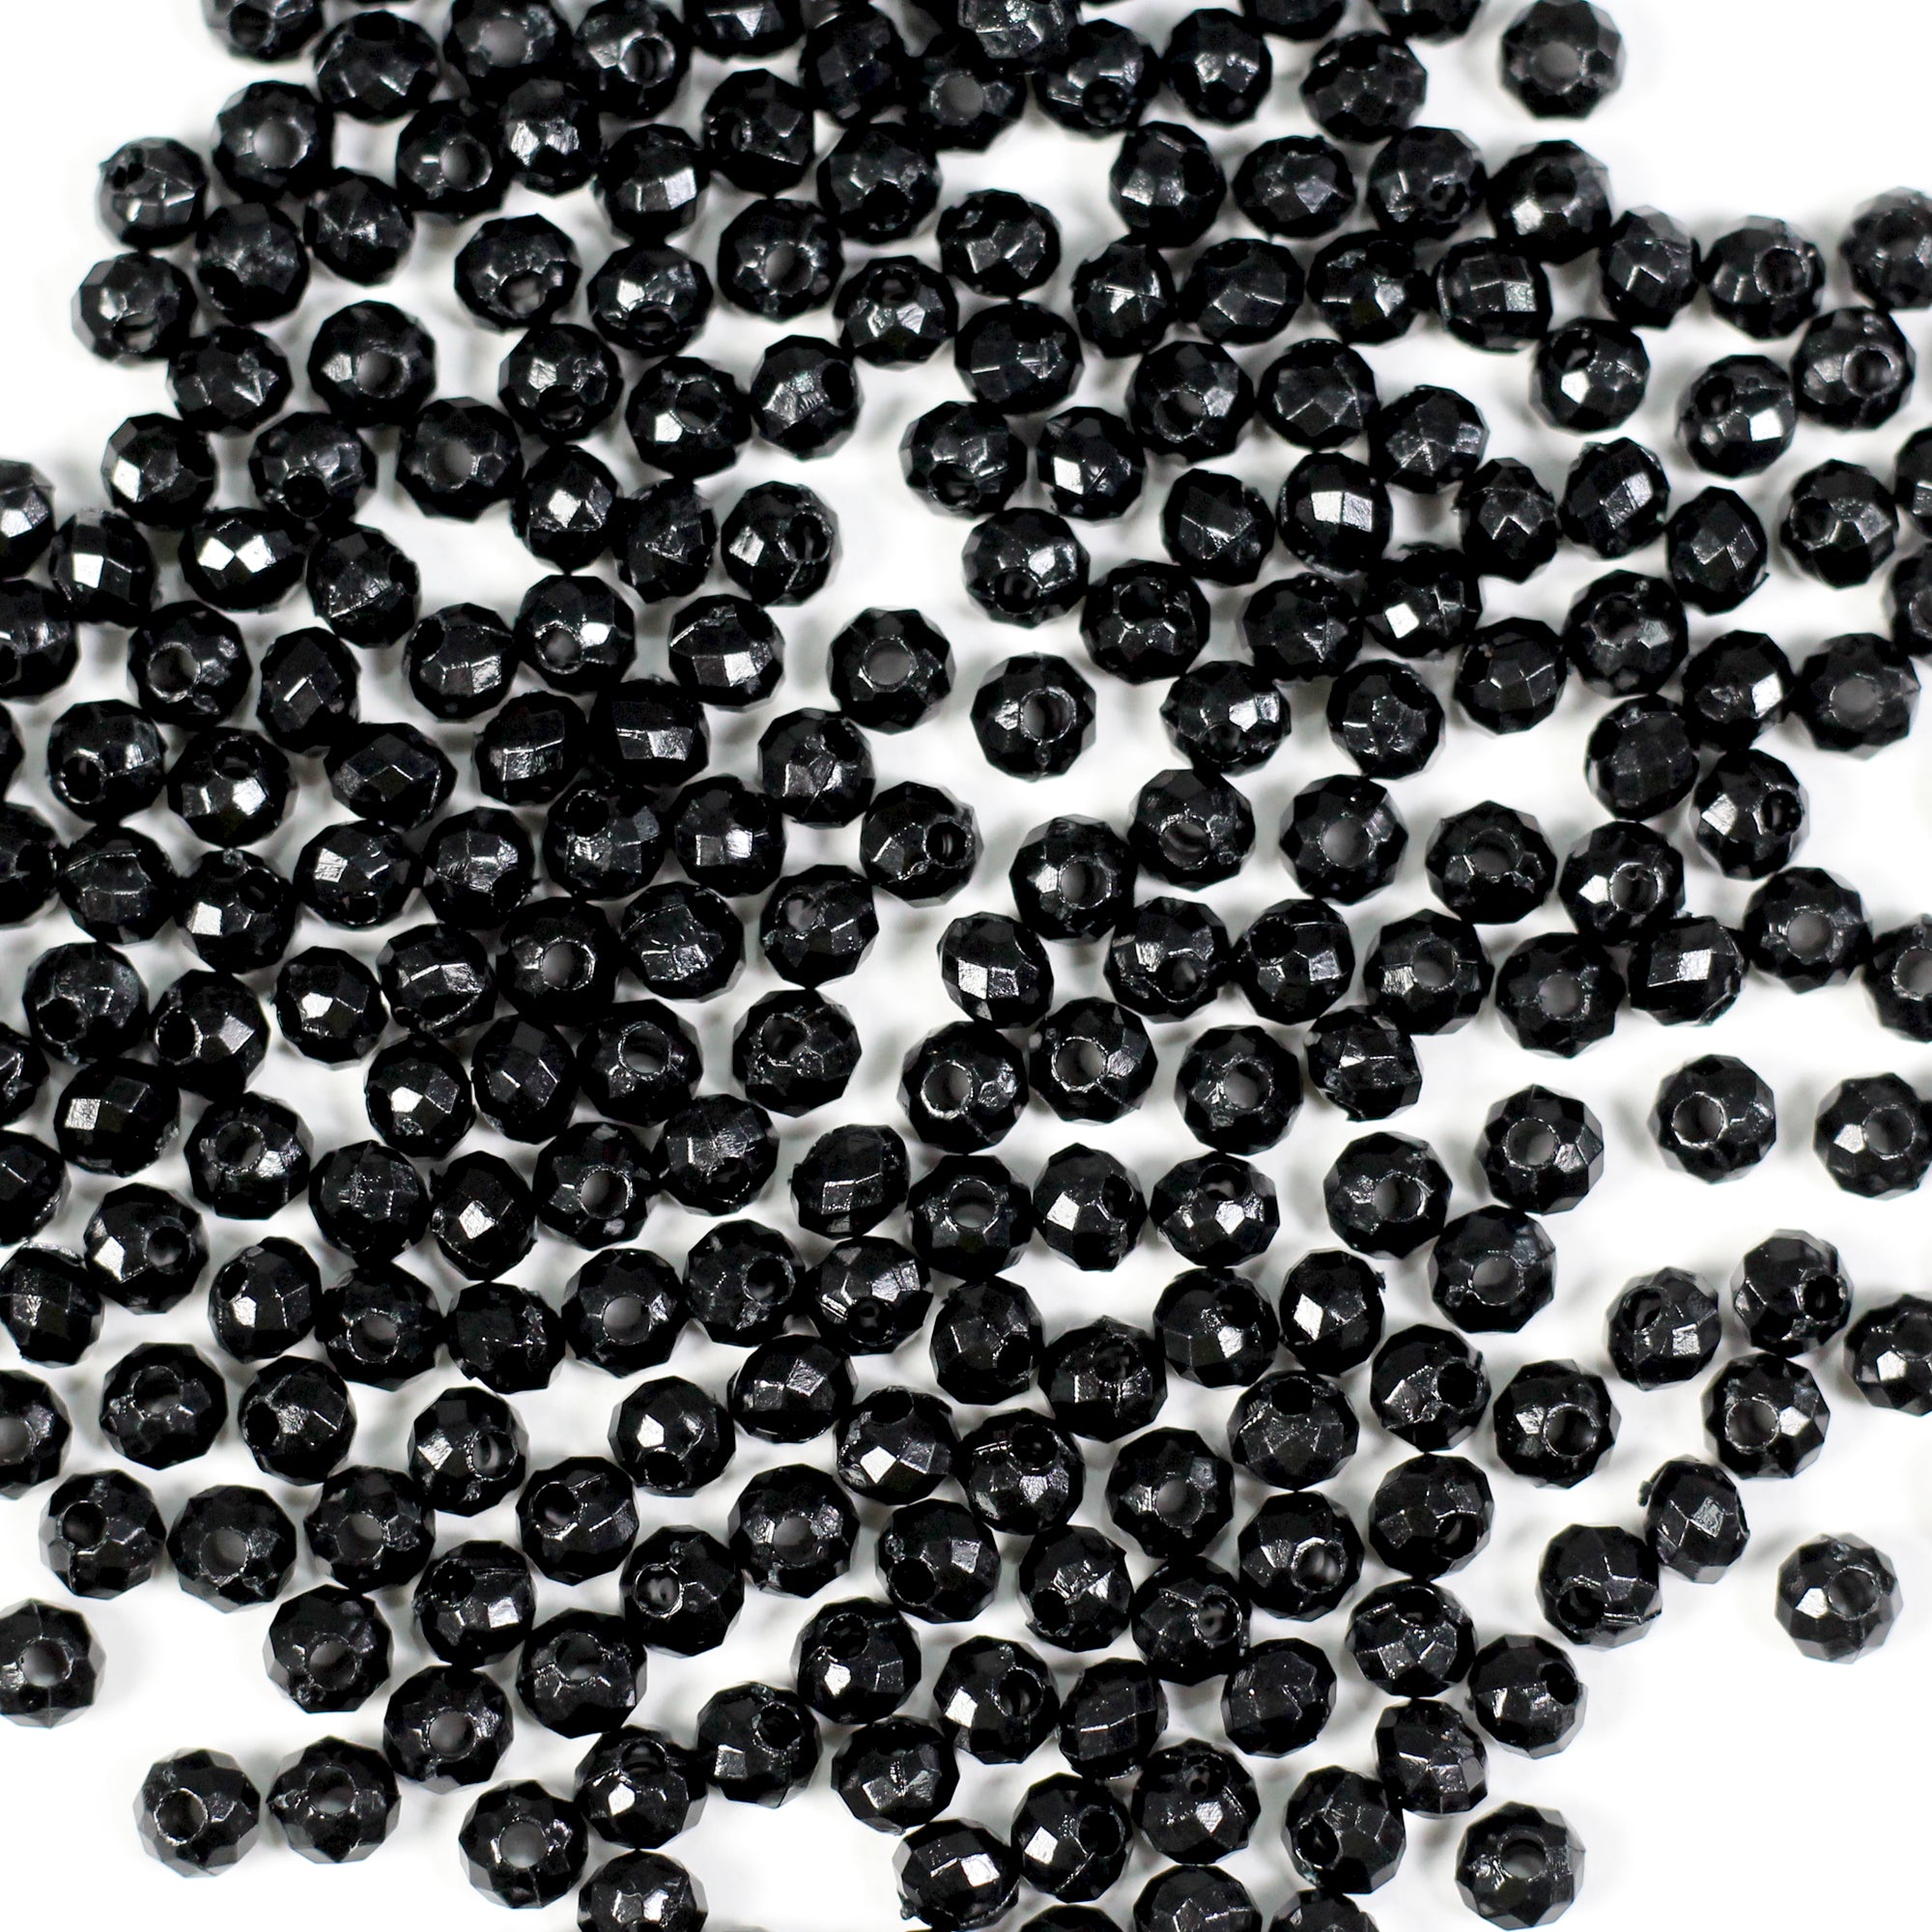 Beads Glossy Black Faceted Seed 4Mm X 3Mm 30G Pb Ib